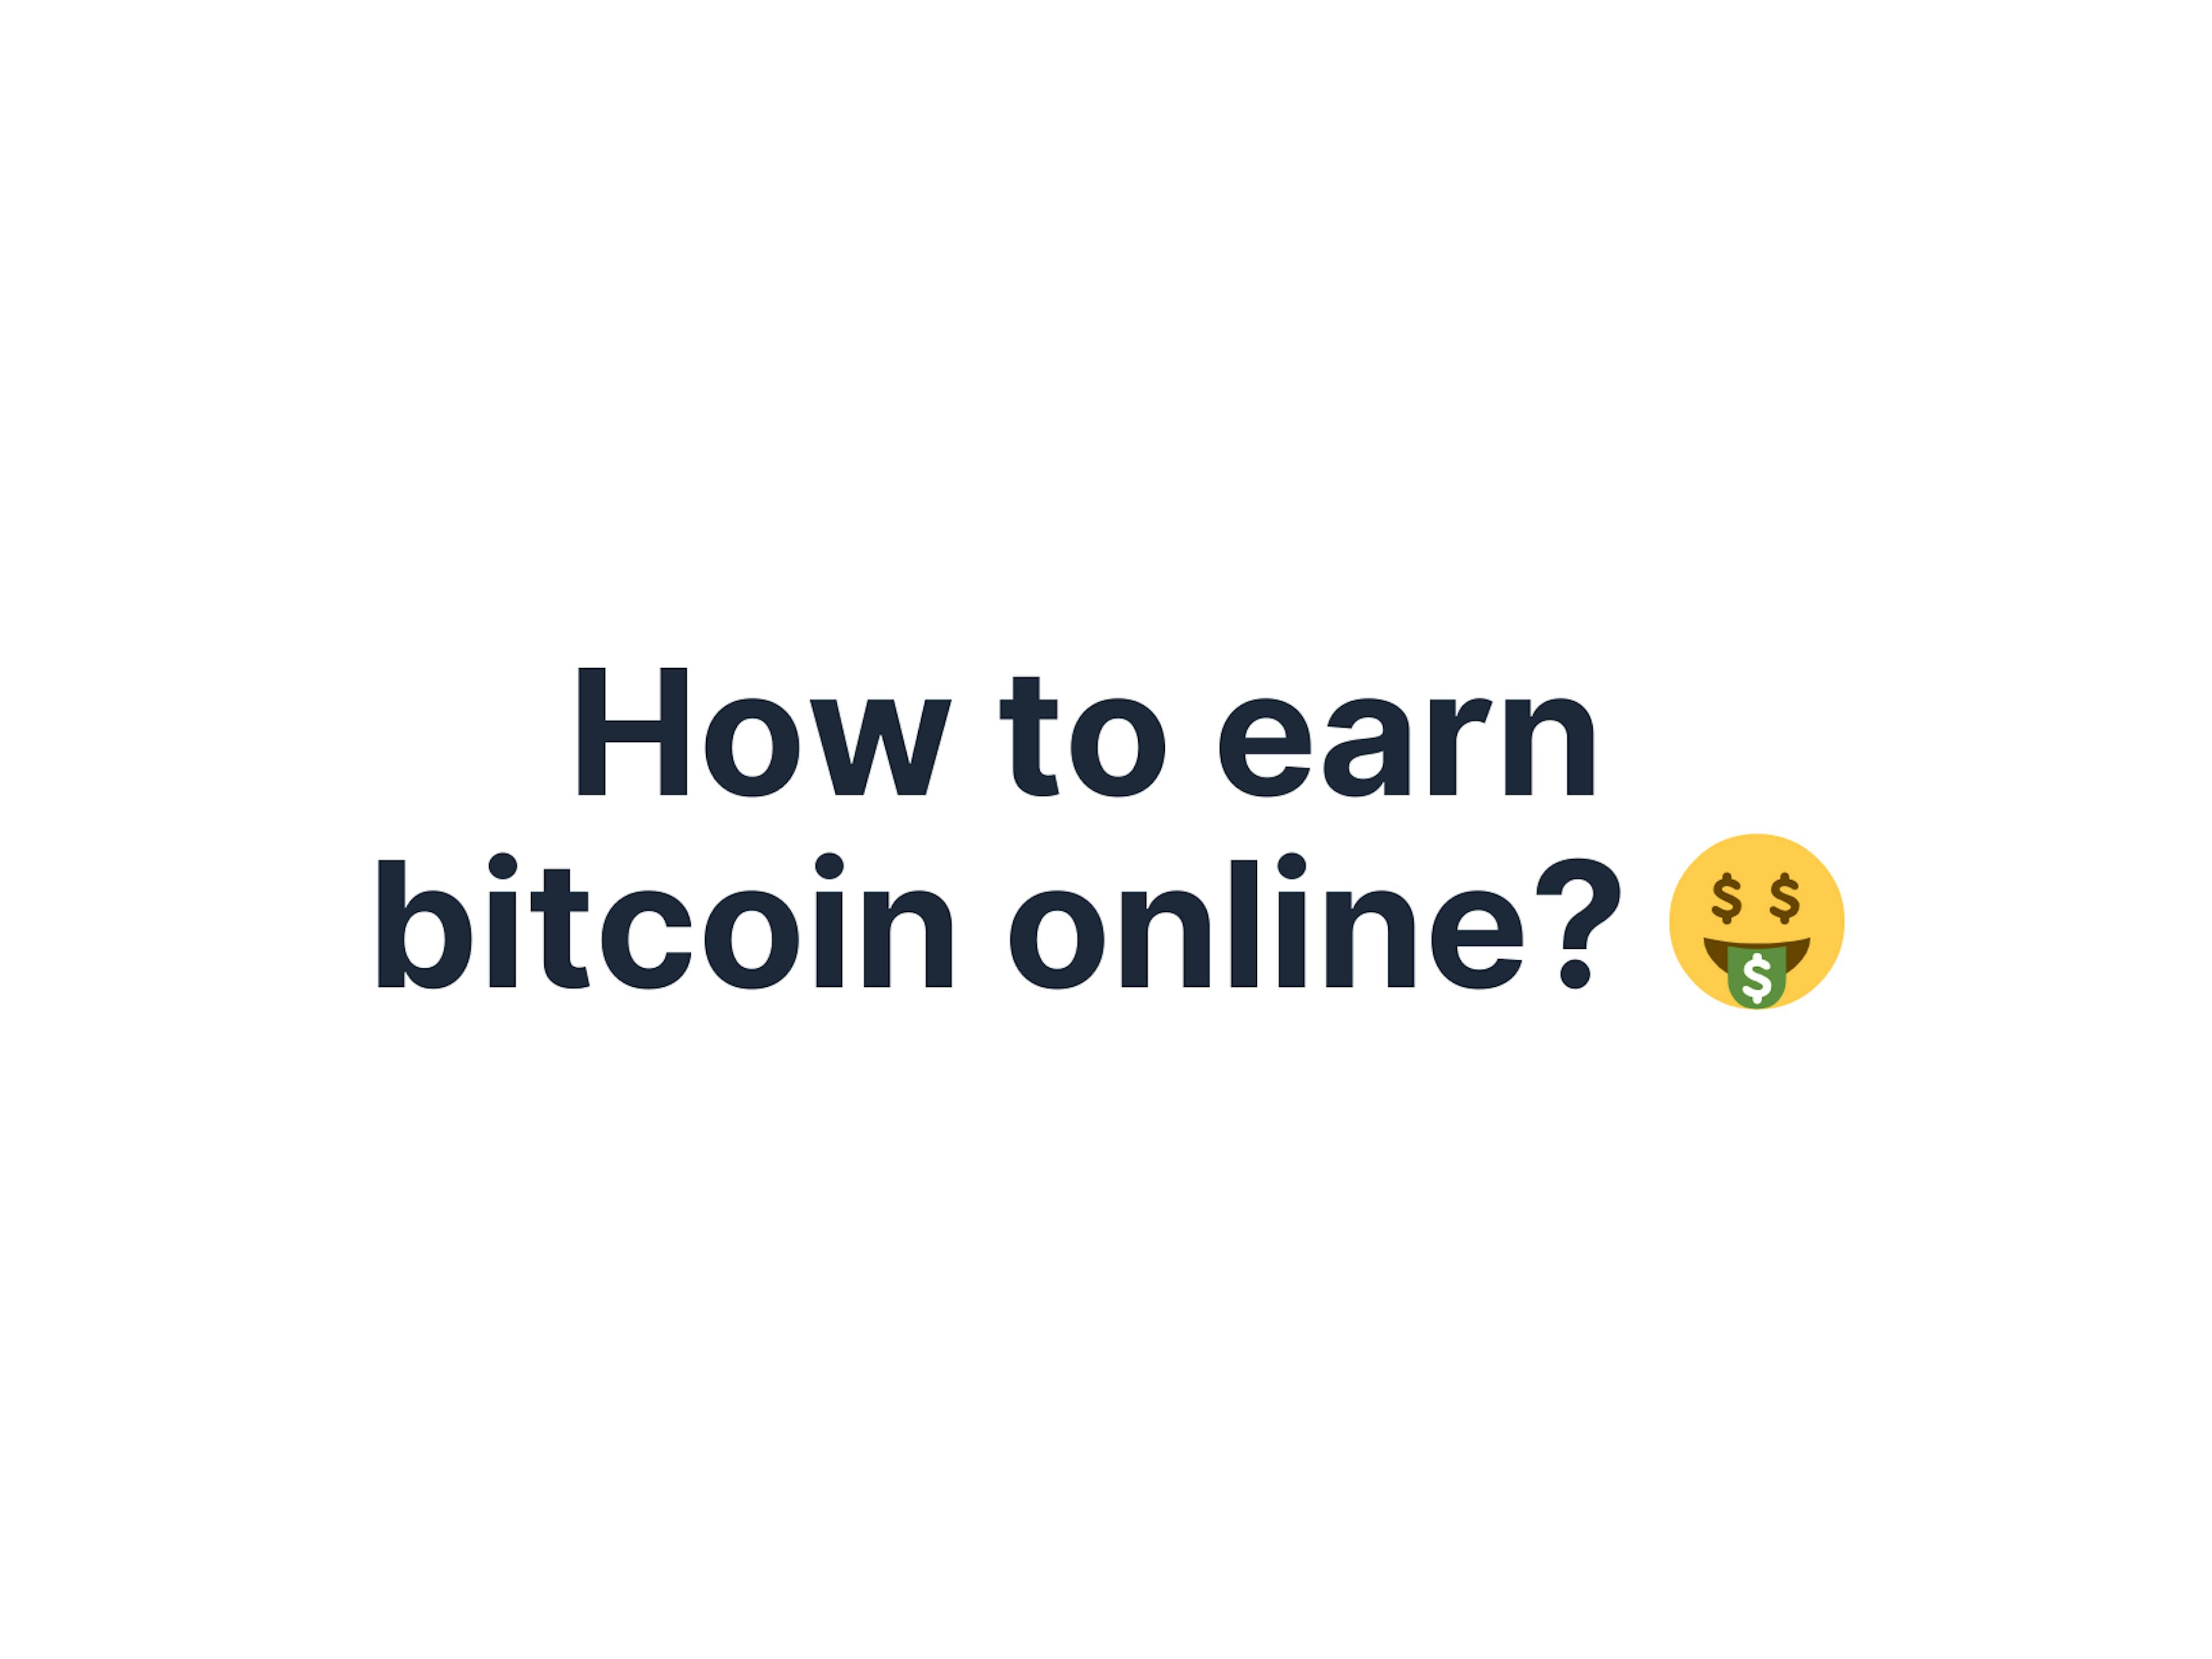 How to earn bitcoin online?